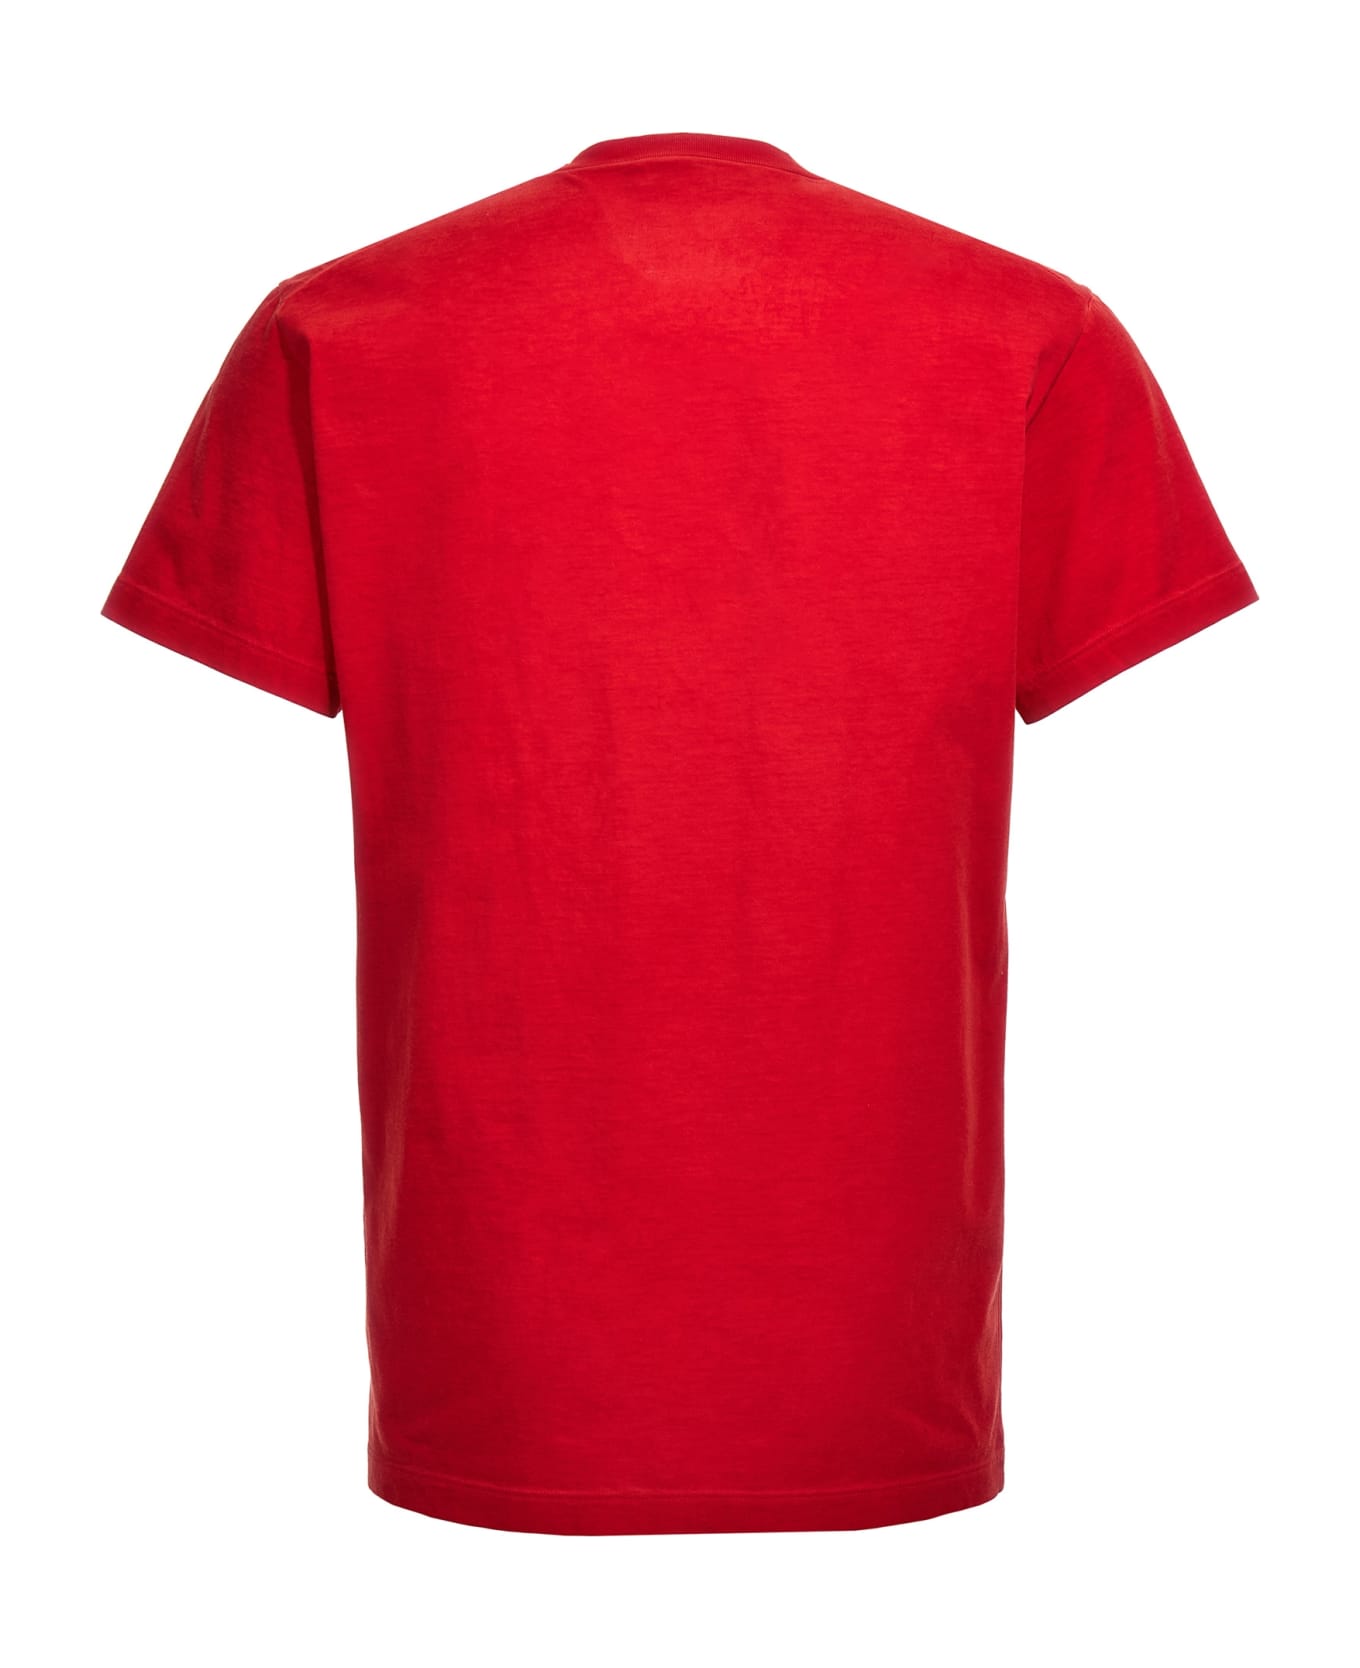 Dsquared2 T-shirt - Red シャツ